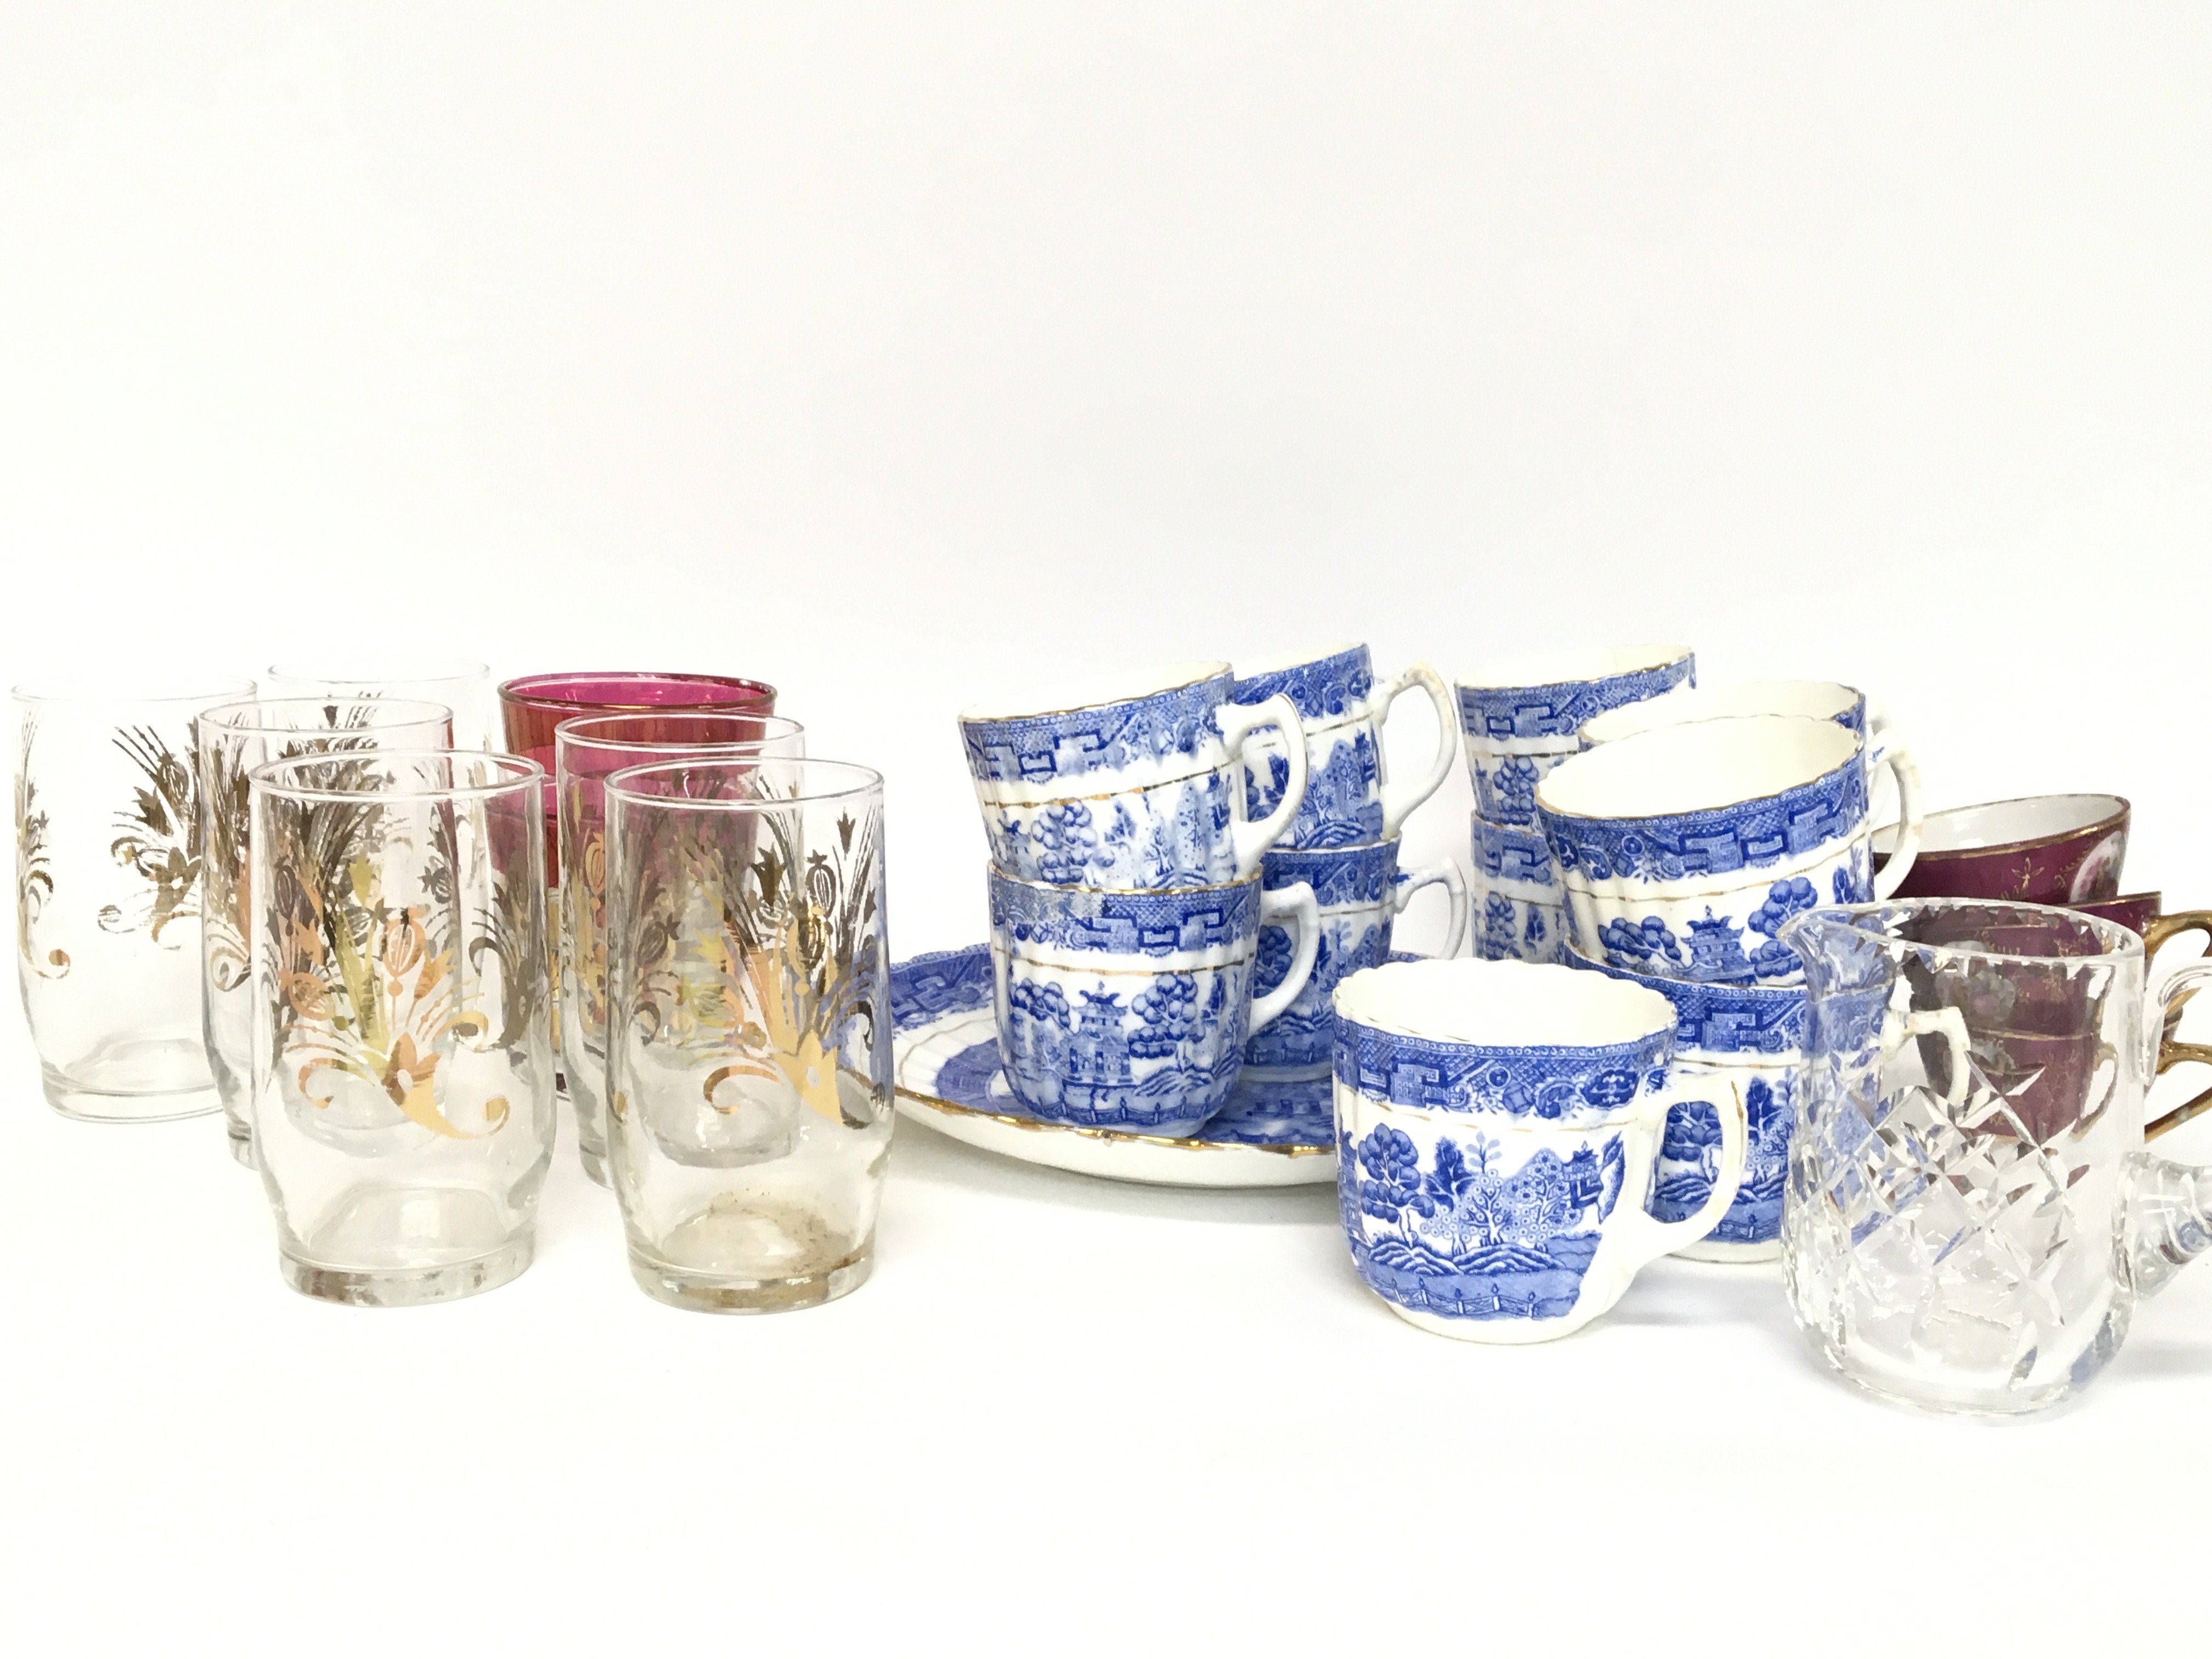 A collection of Gladstone China, Foreign cups and glasses. Postage category D